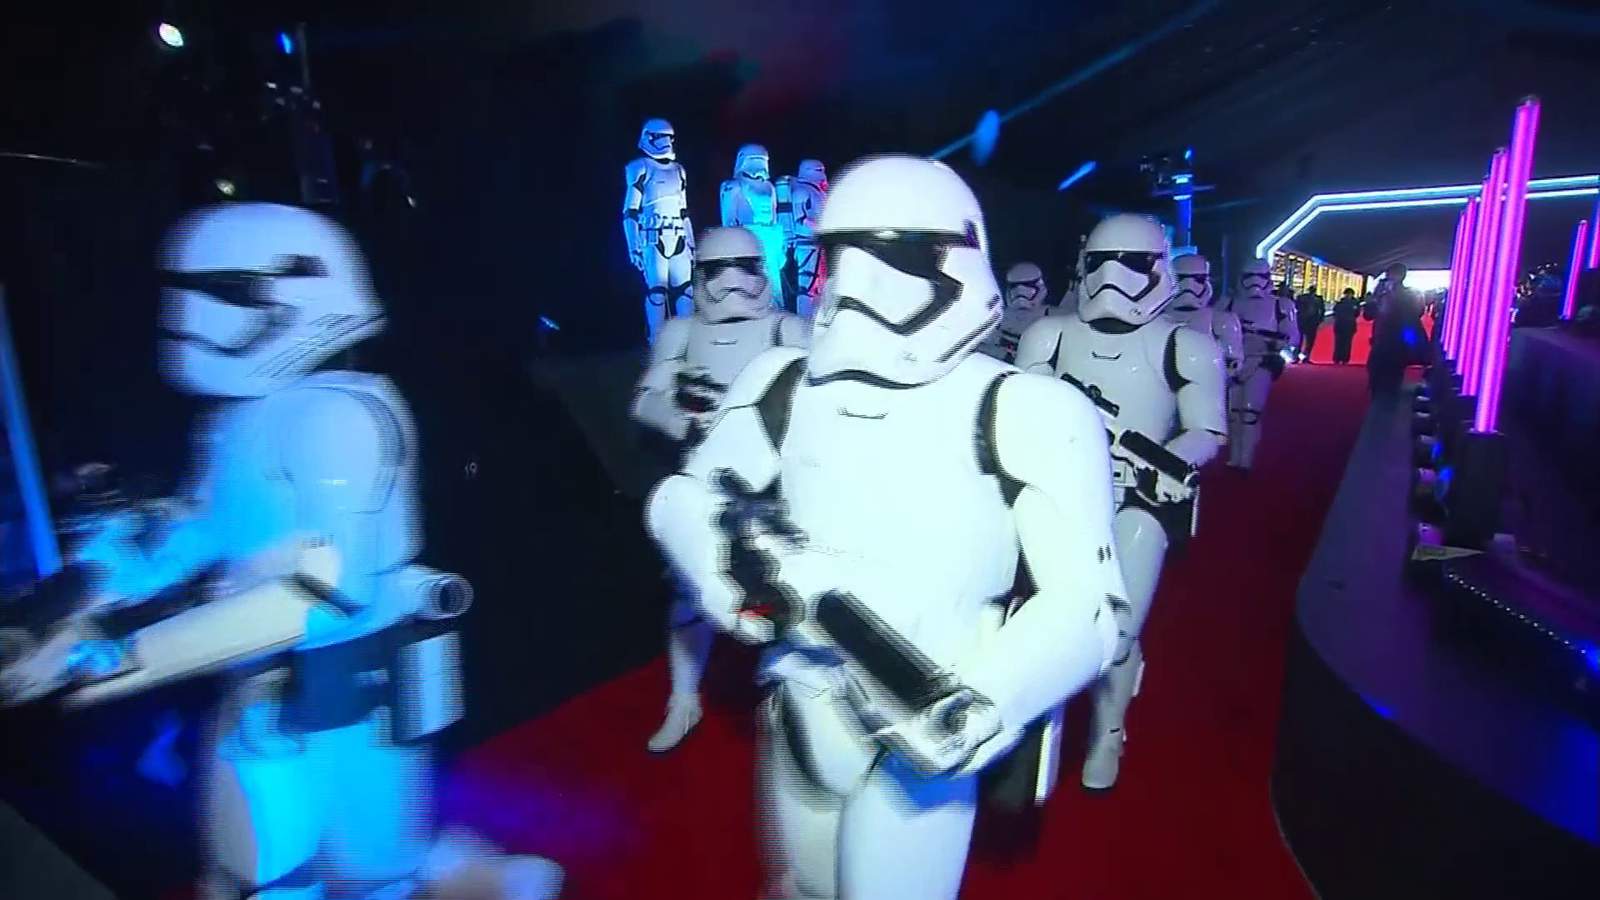 Get paid $1,000 to watch all of the Star Wars movies